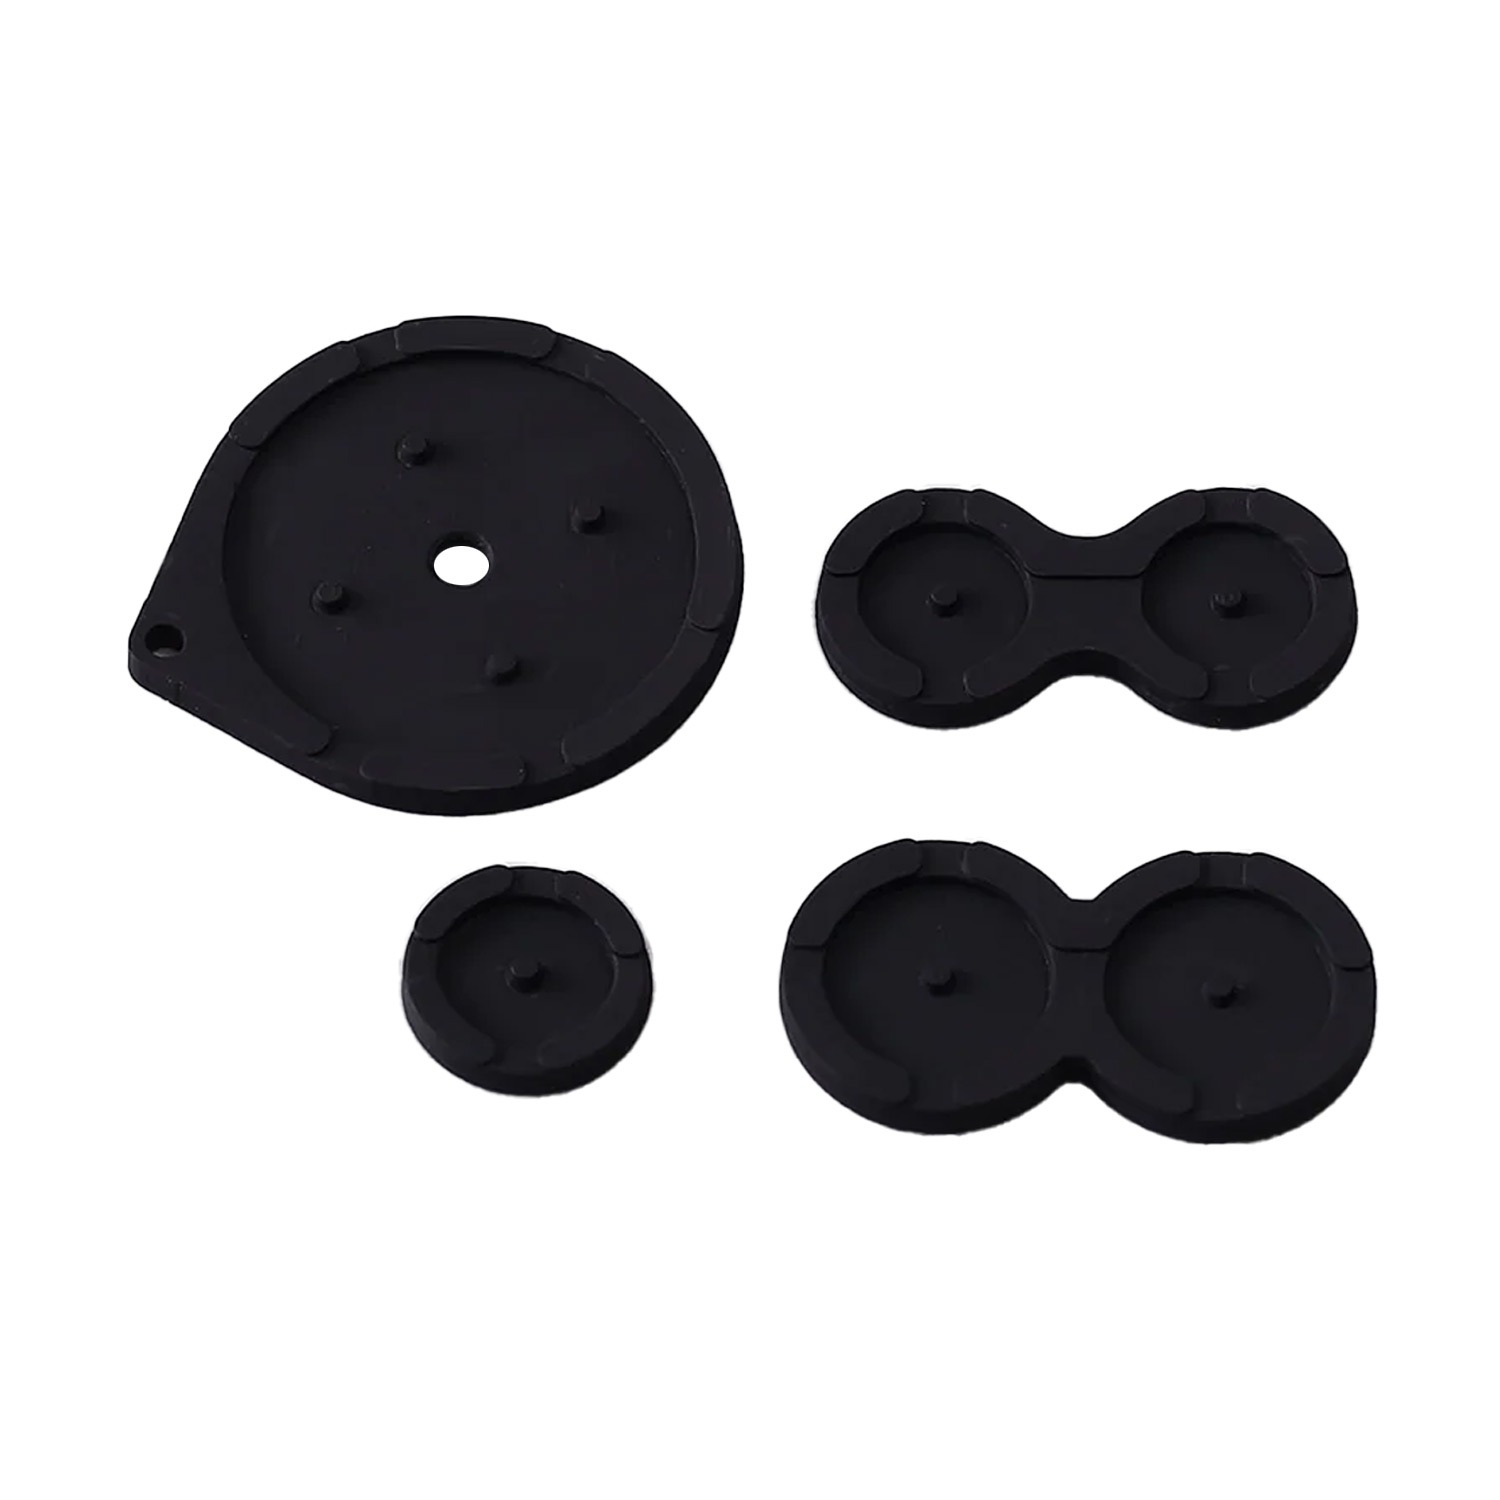 Game Boy Advance SP Silicone Pads (Black)